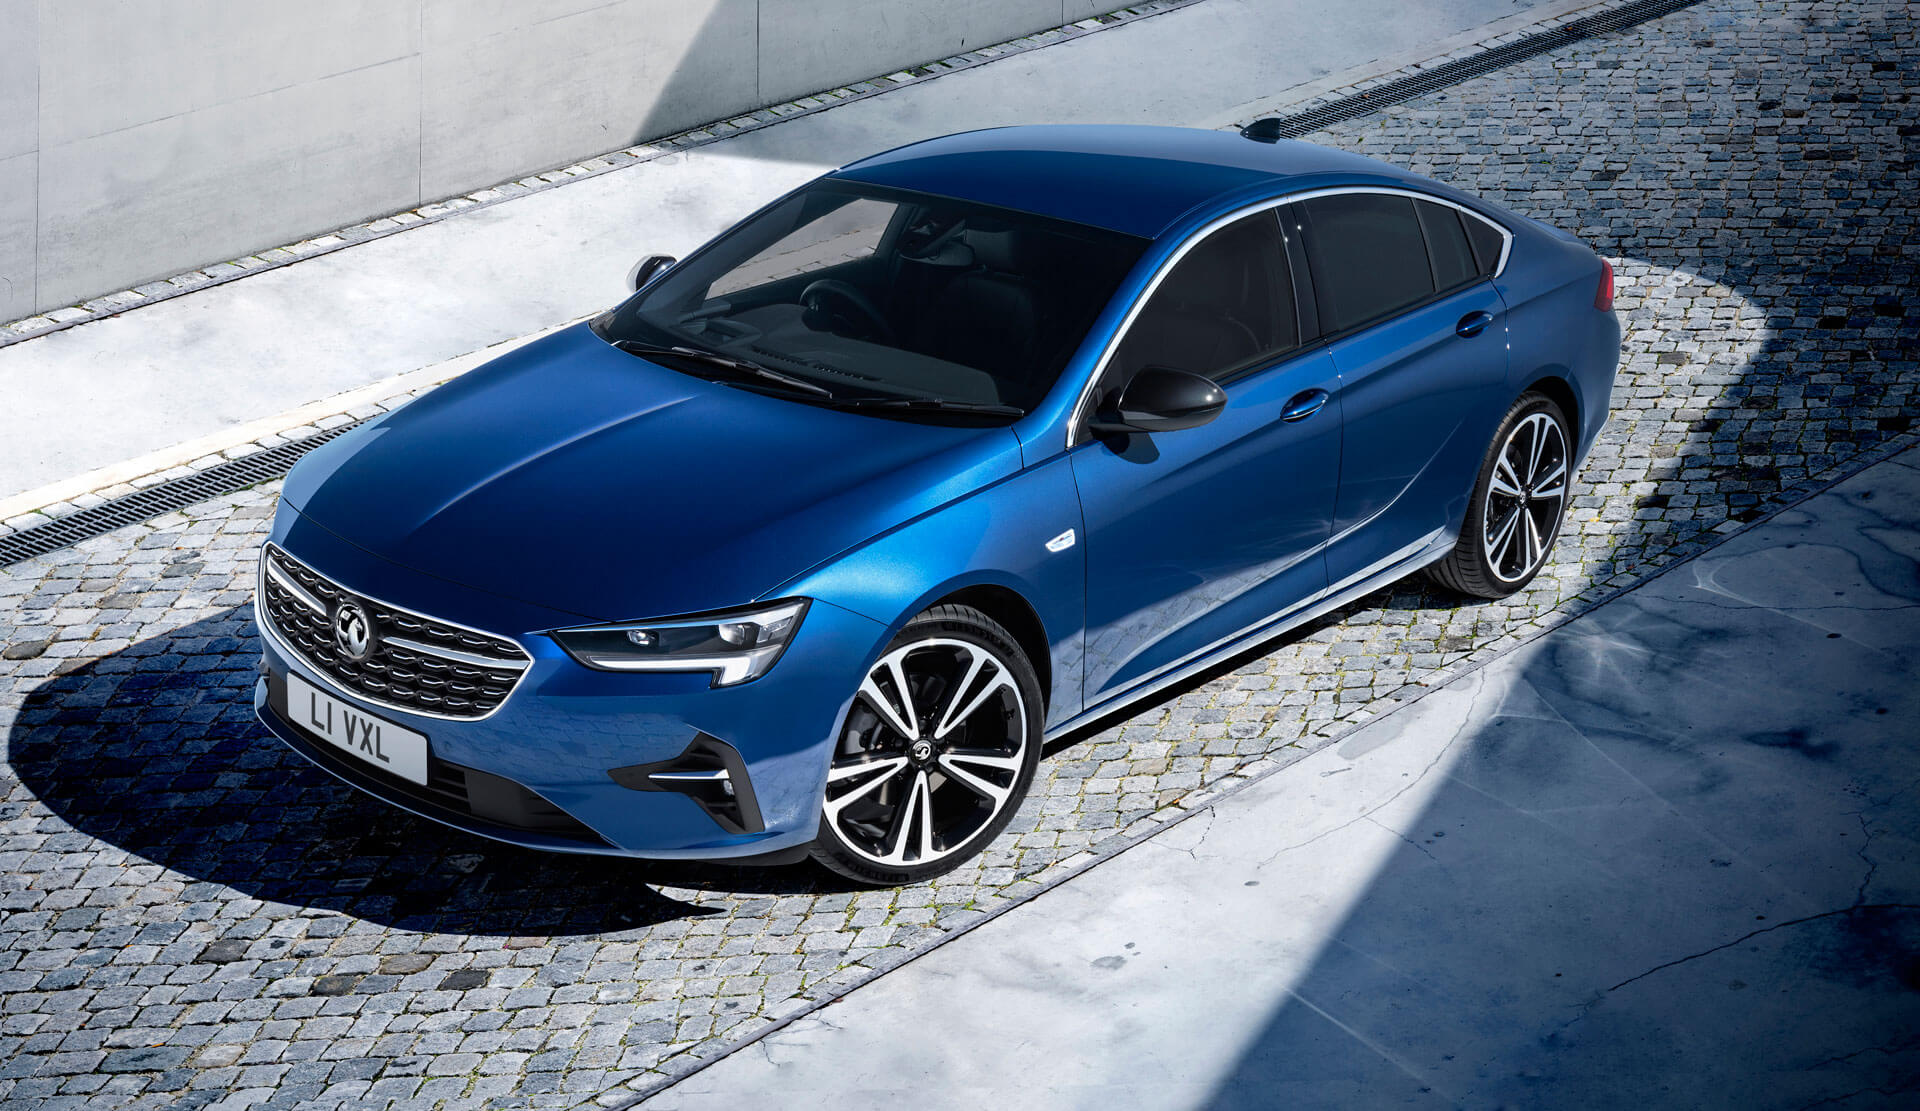 Next-Gen Opel/Vauxhall Insignia Could Morph Into A Crossover